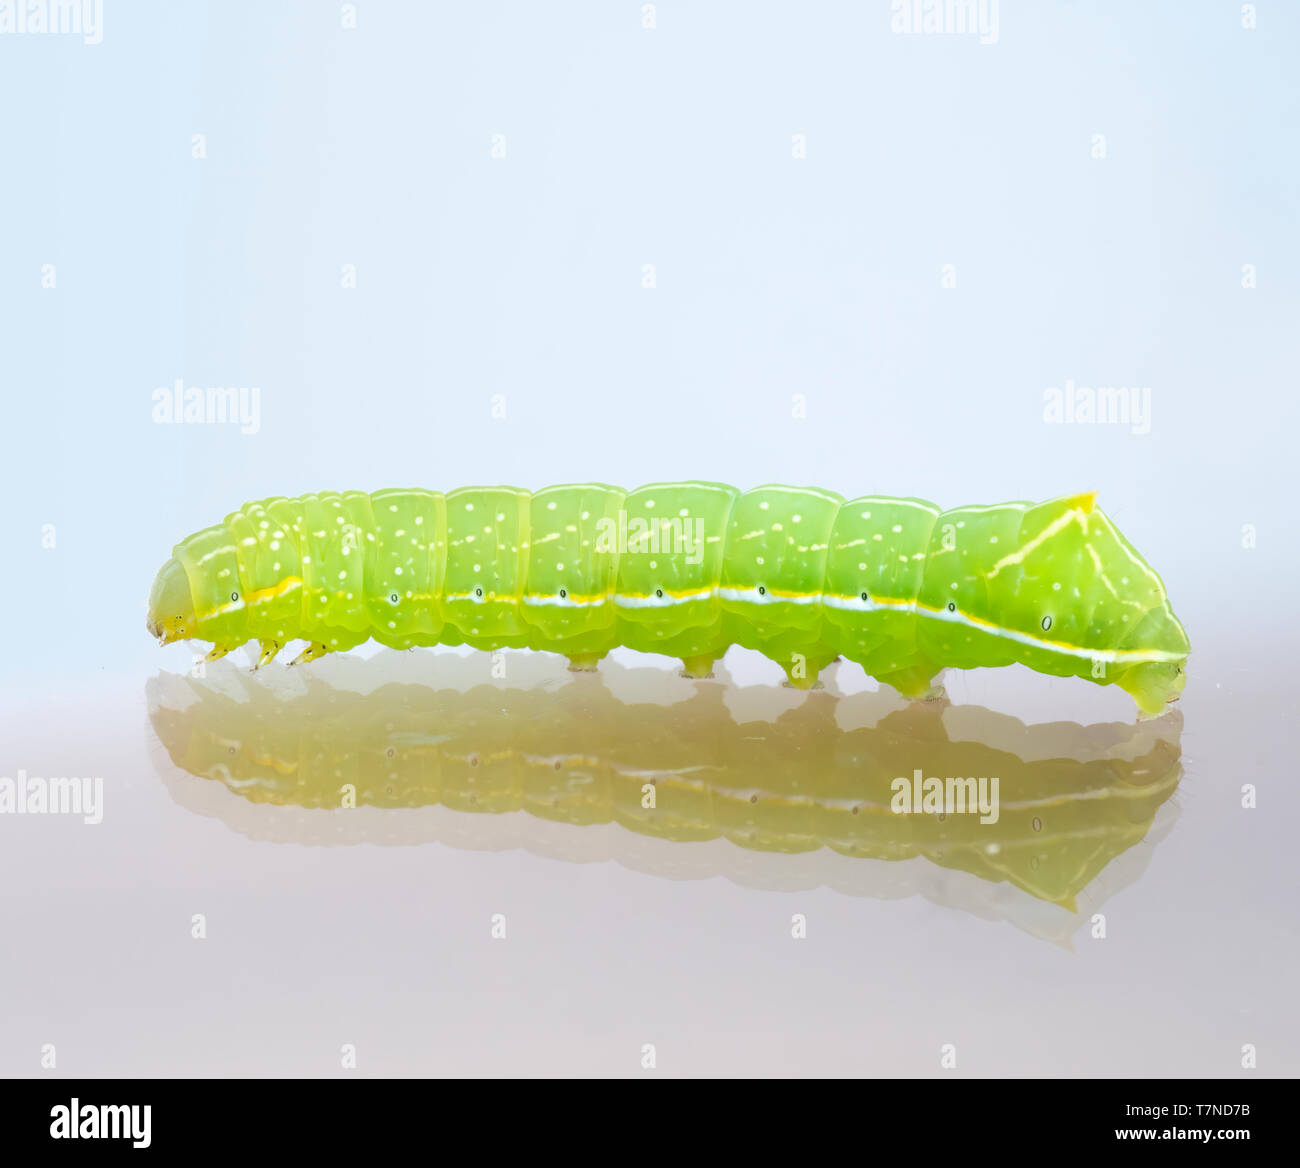 Green caterpillar with yellow, white and black markings. Amphipyra pyramidoides, Copper Underwing Moth larva, early instar. Stock Photo